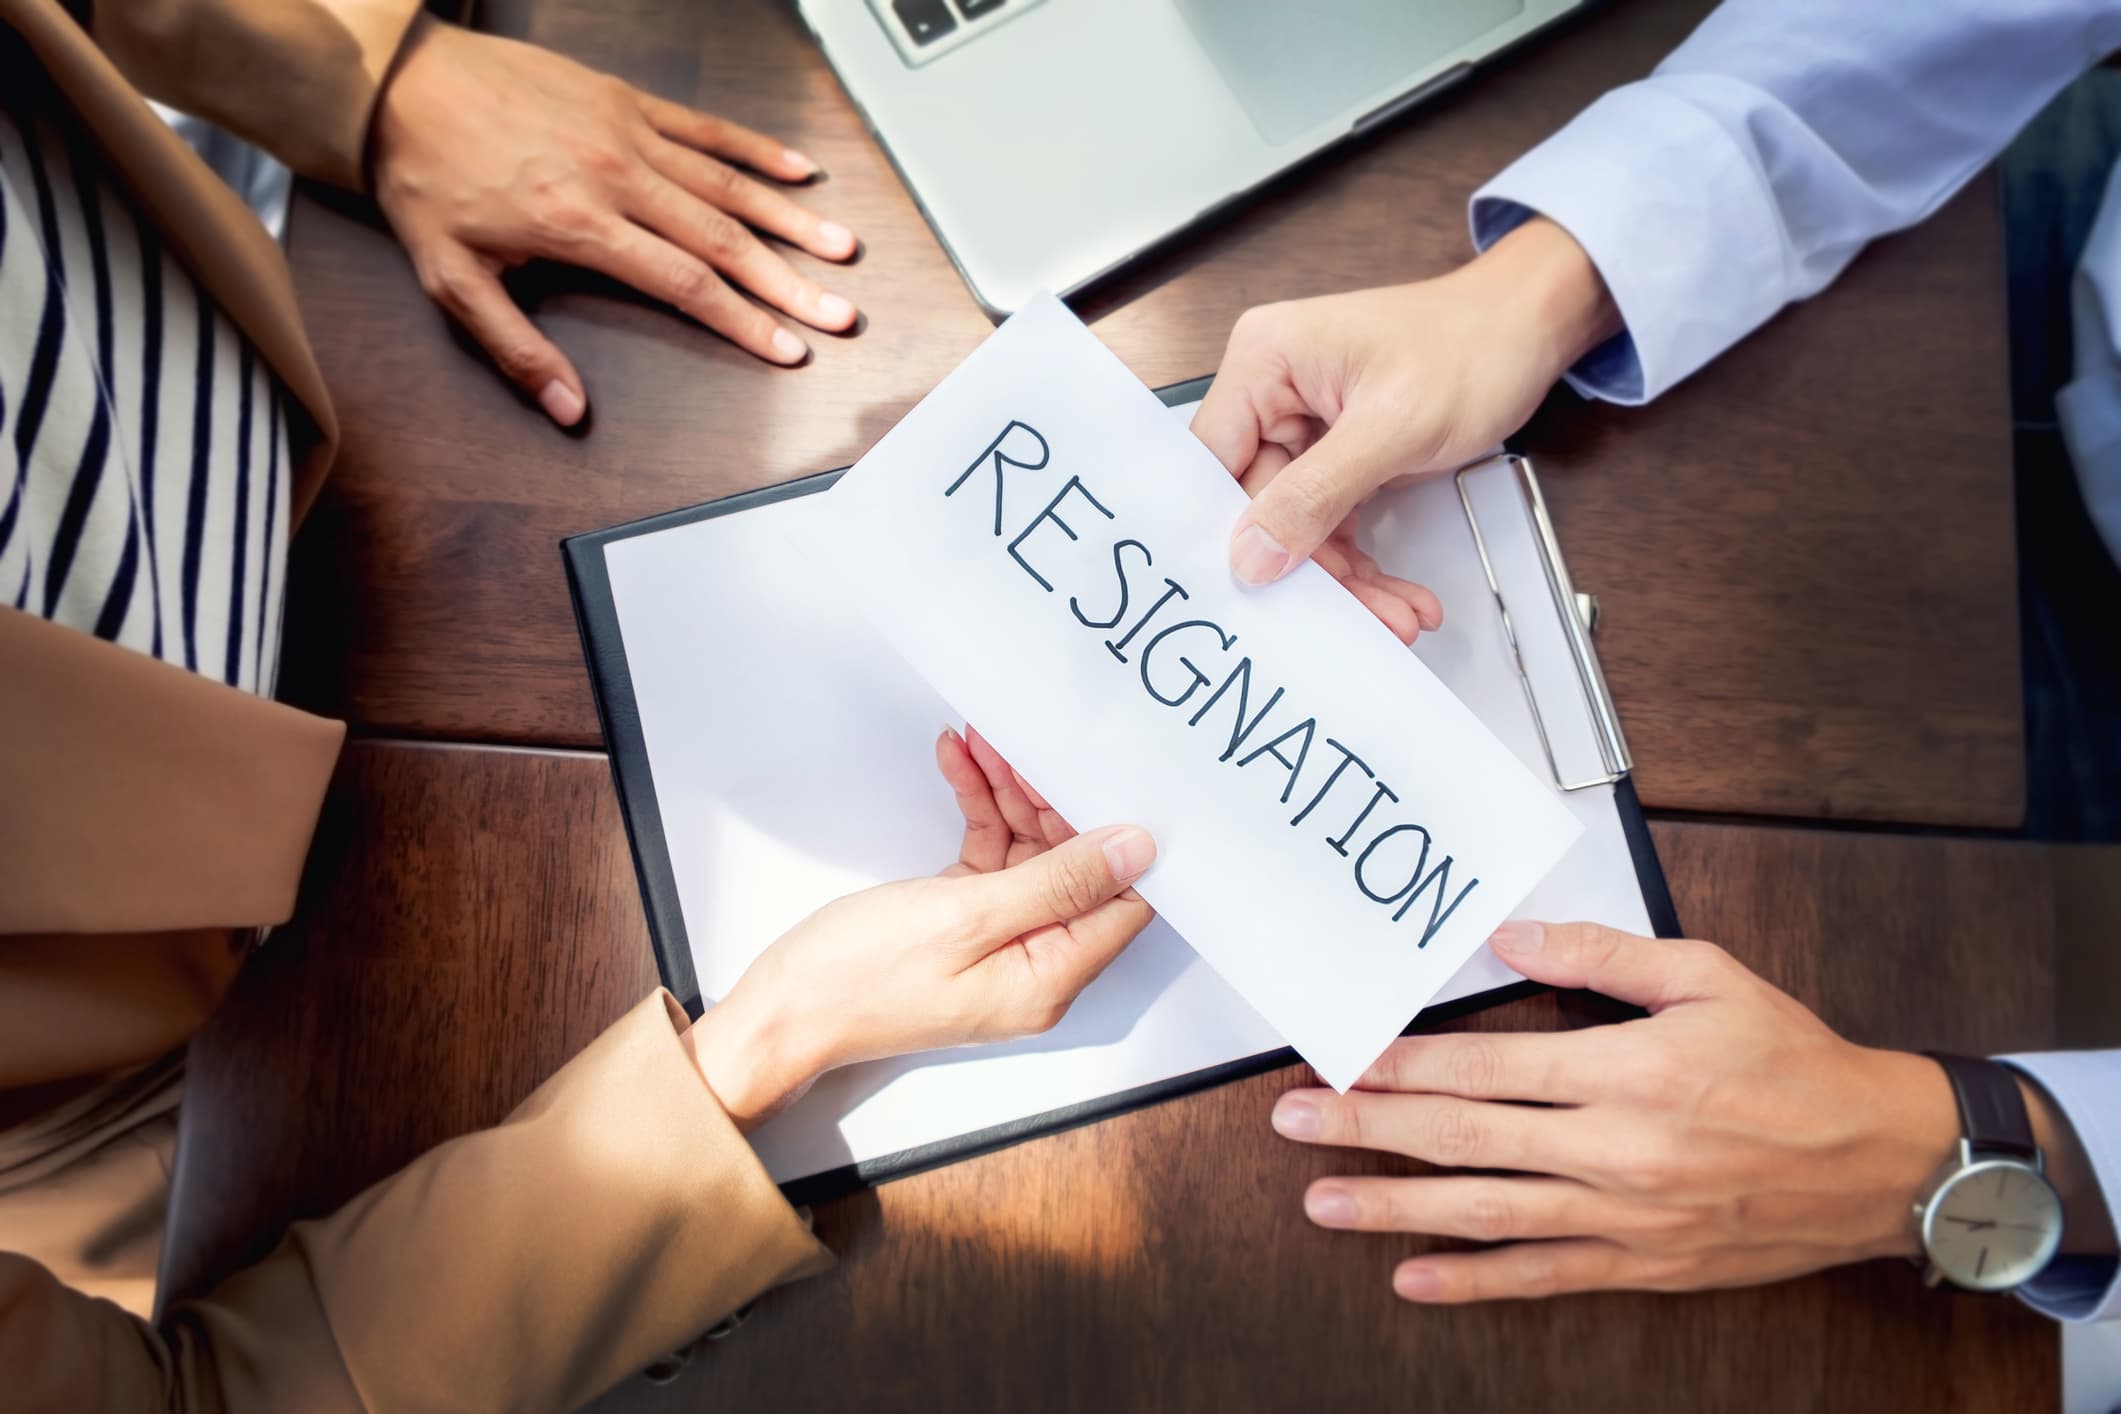 How to write a professional resignation letter?